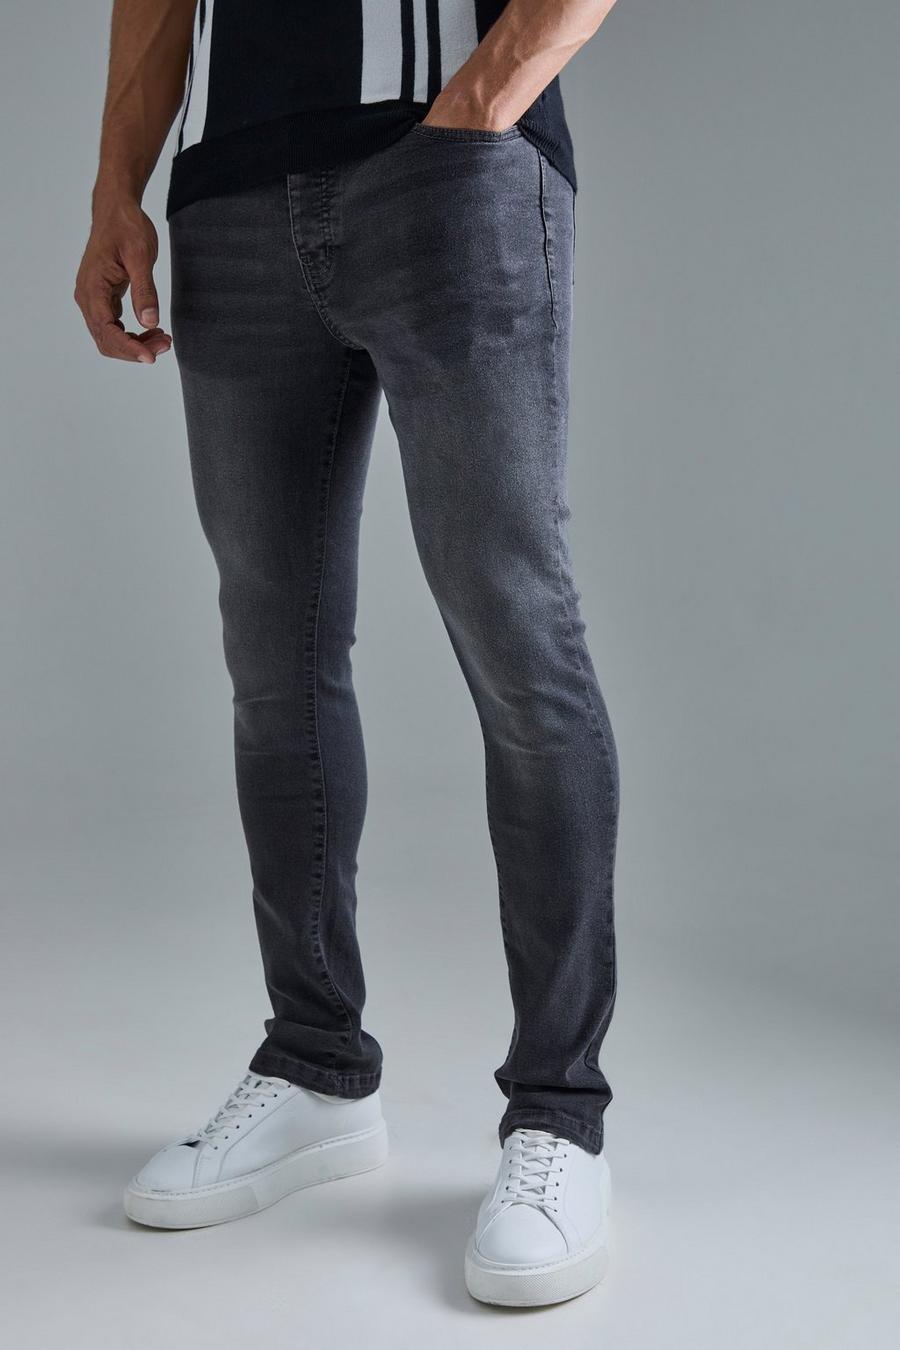 Skinny Stretch Flare Jeans In Charcoal